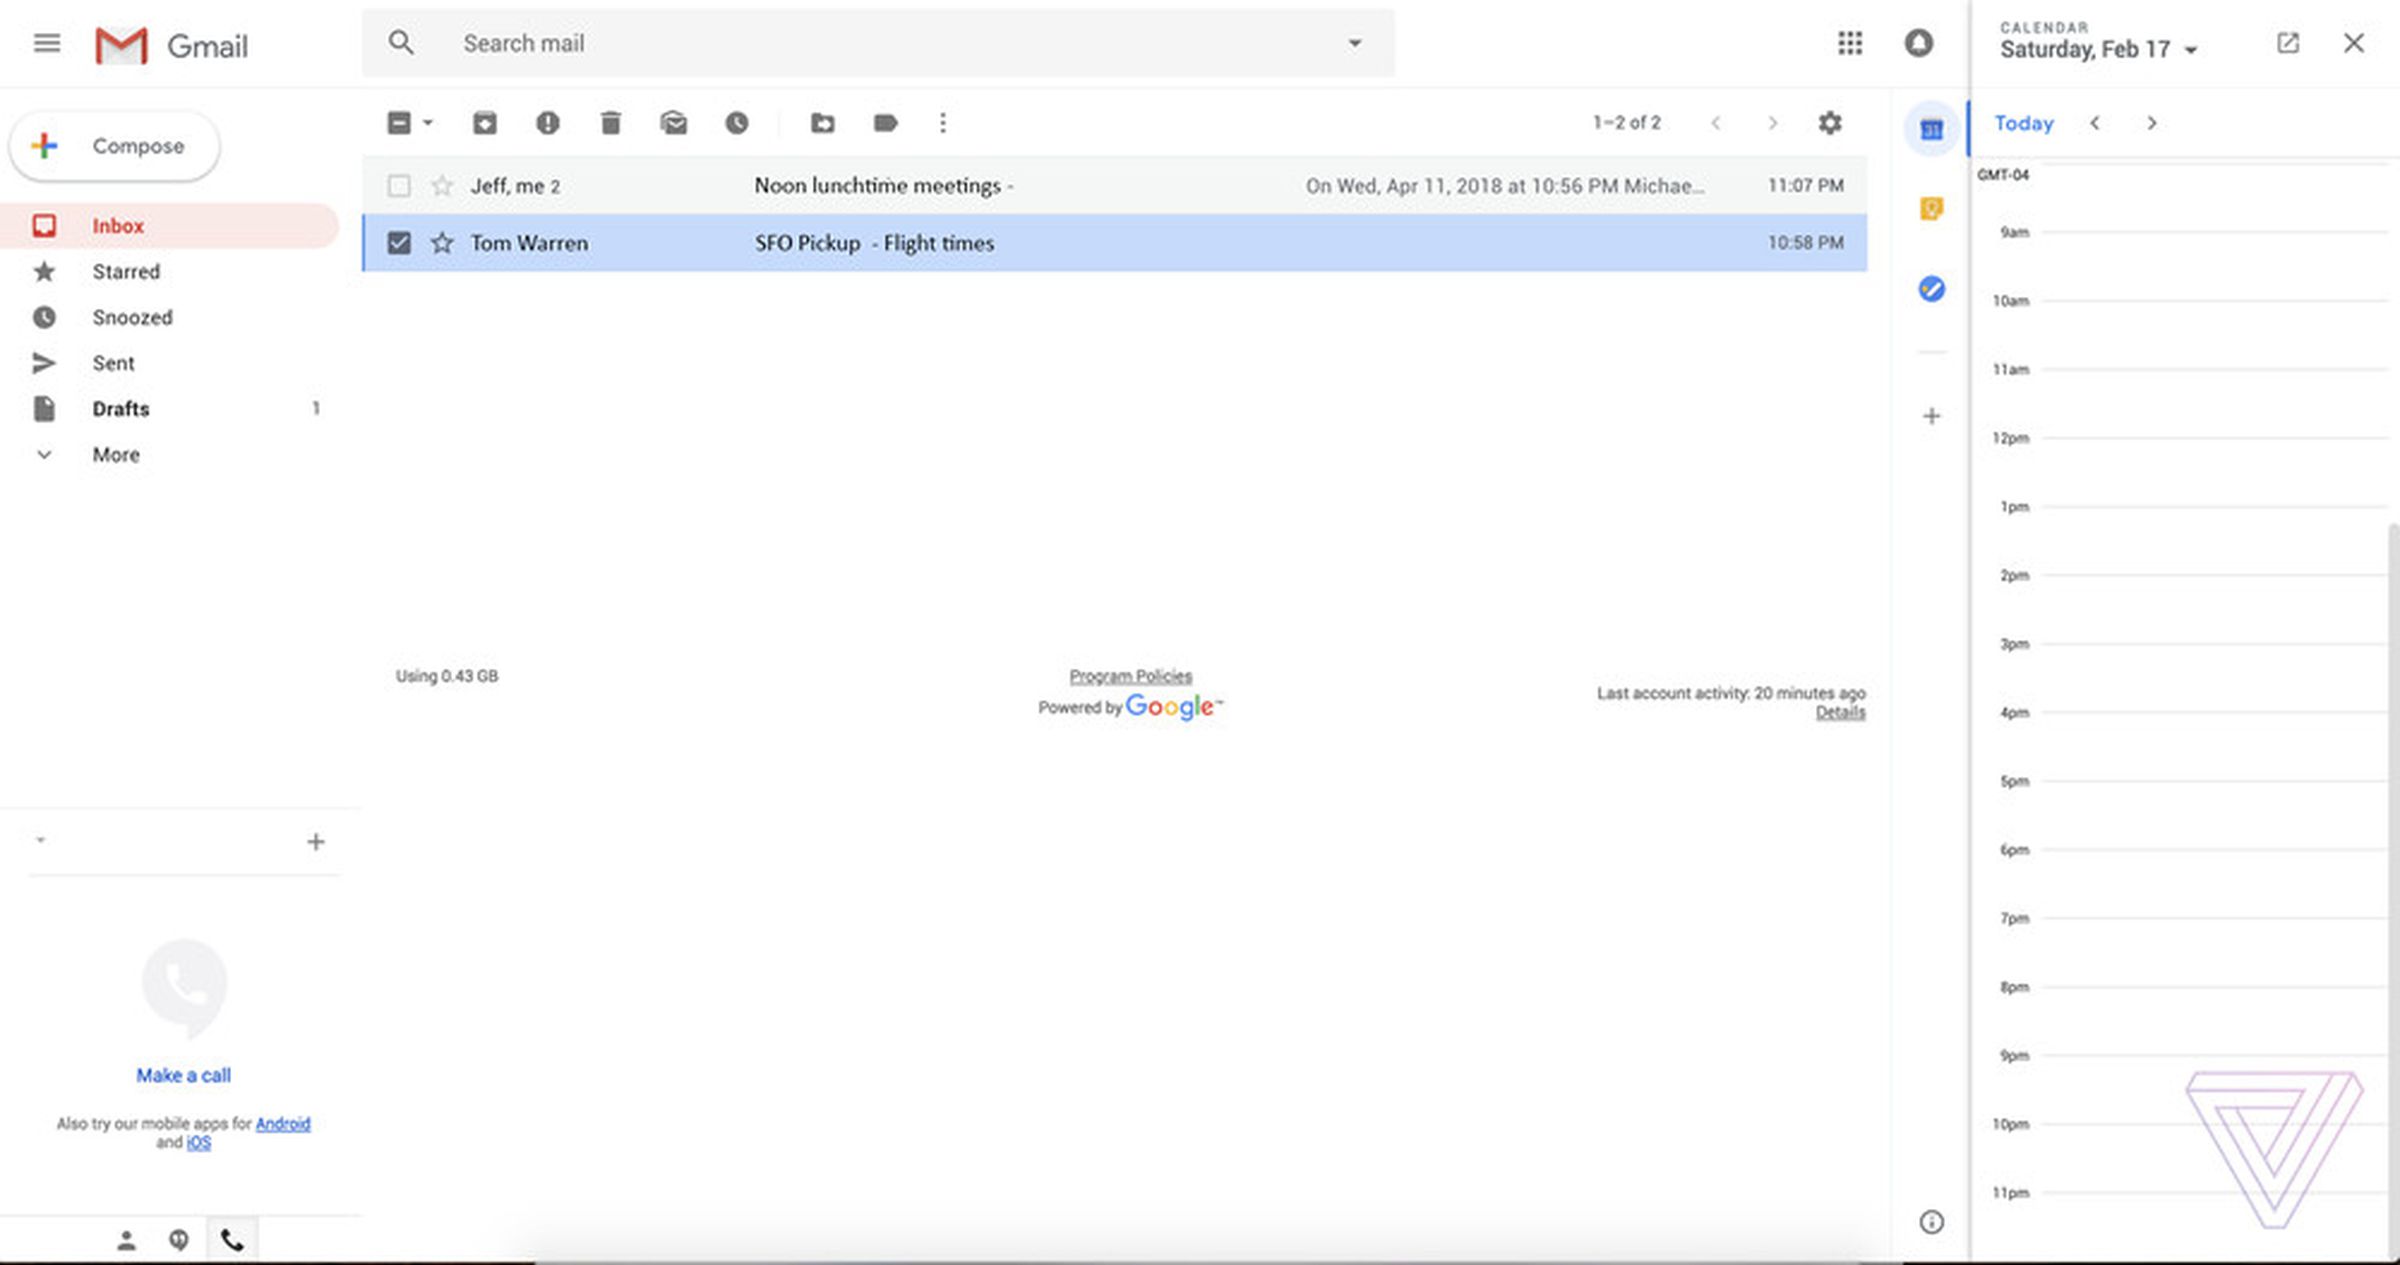 New Gmail with side-by-side calendar